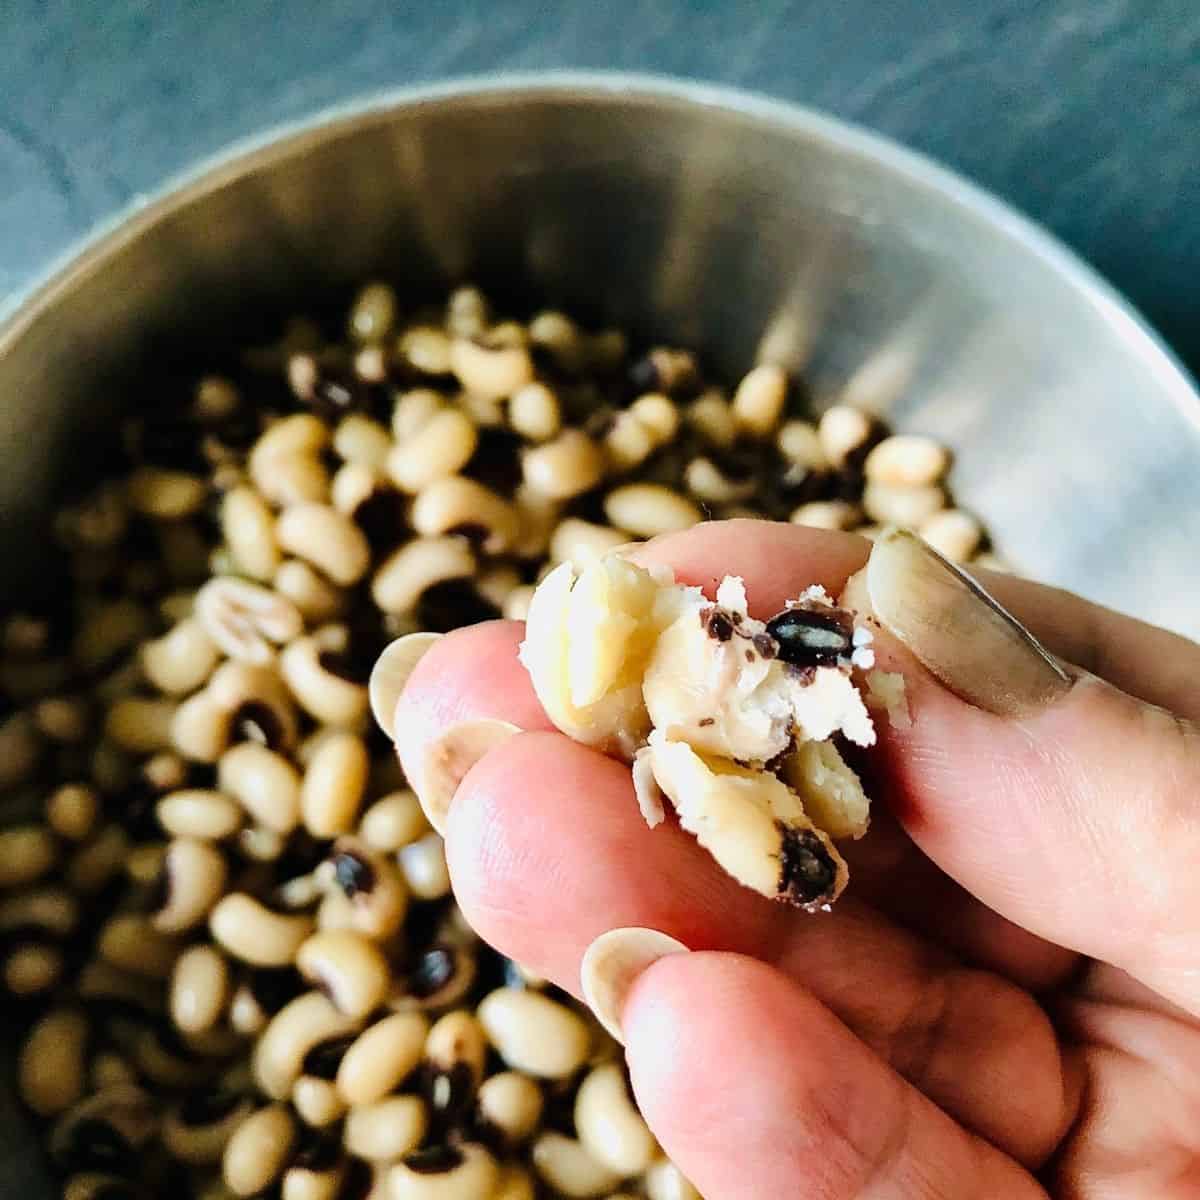 Hand holding crushed cooked black eyed peas between fingers over a bowl of black eyed peas